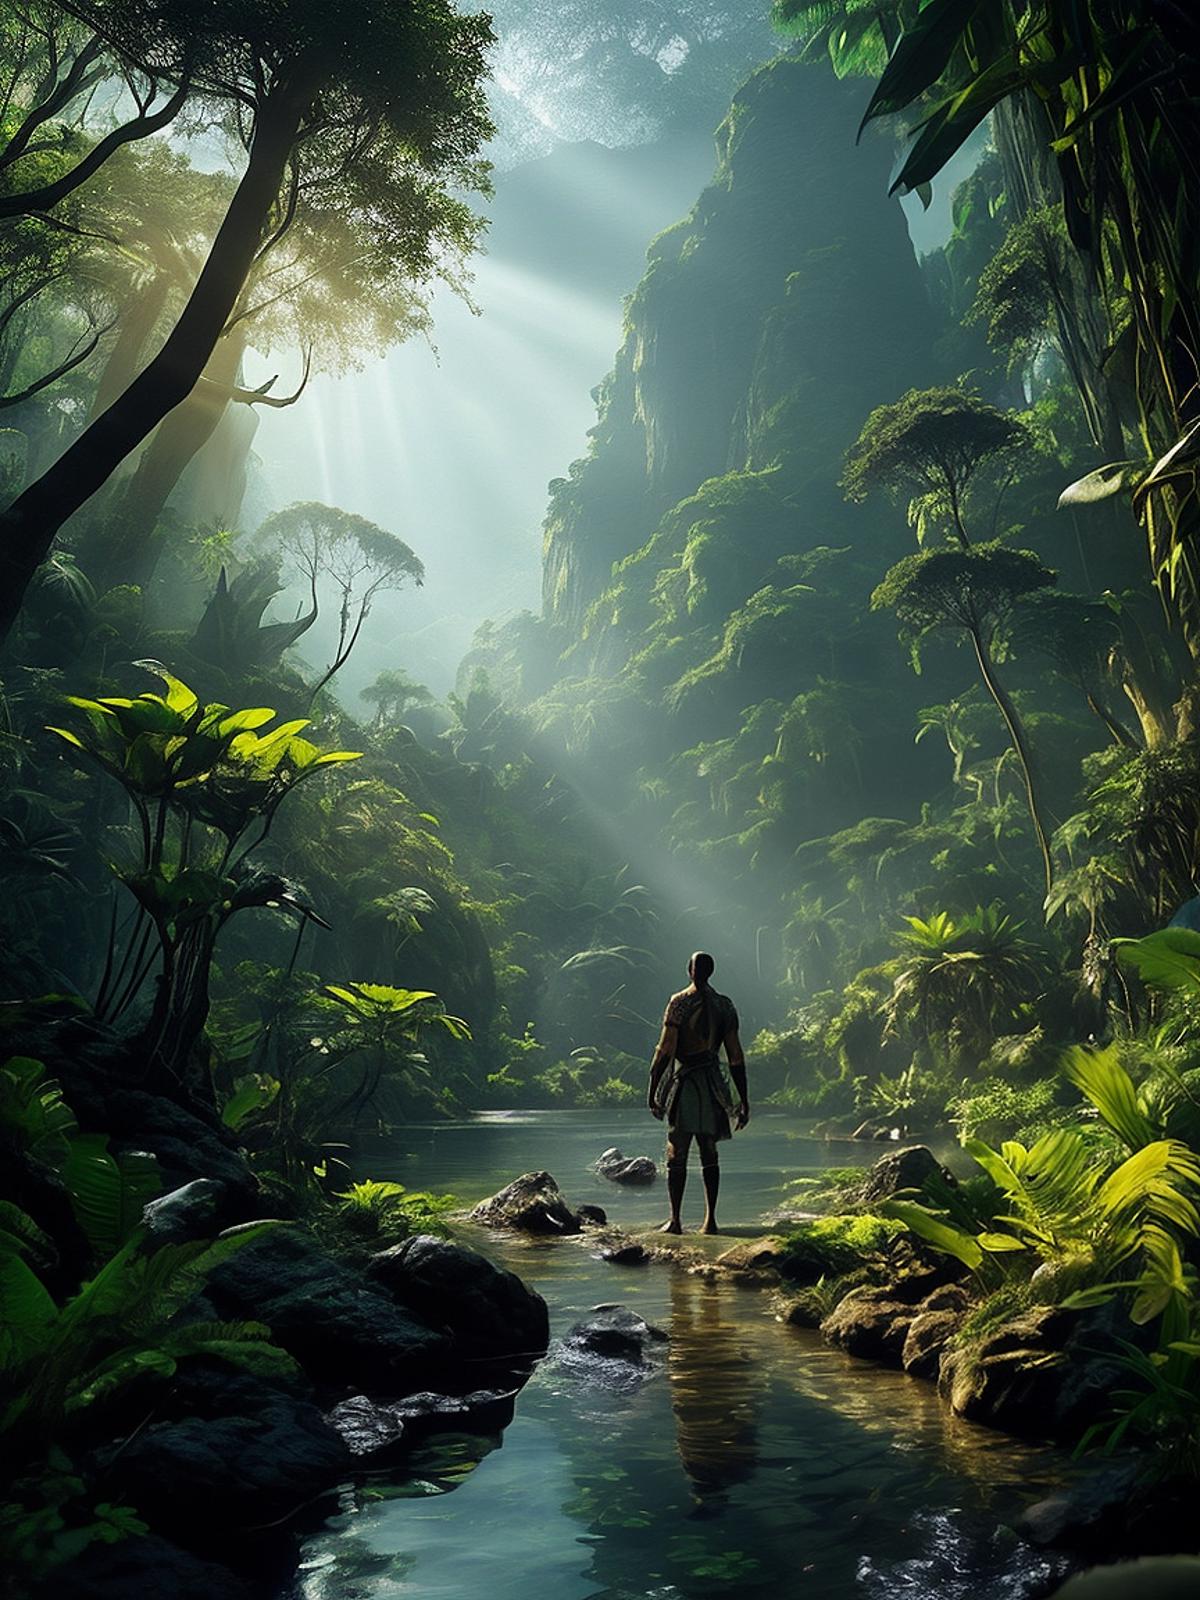 A man walking through a jungle with a waterfall in the background.